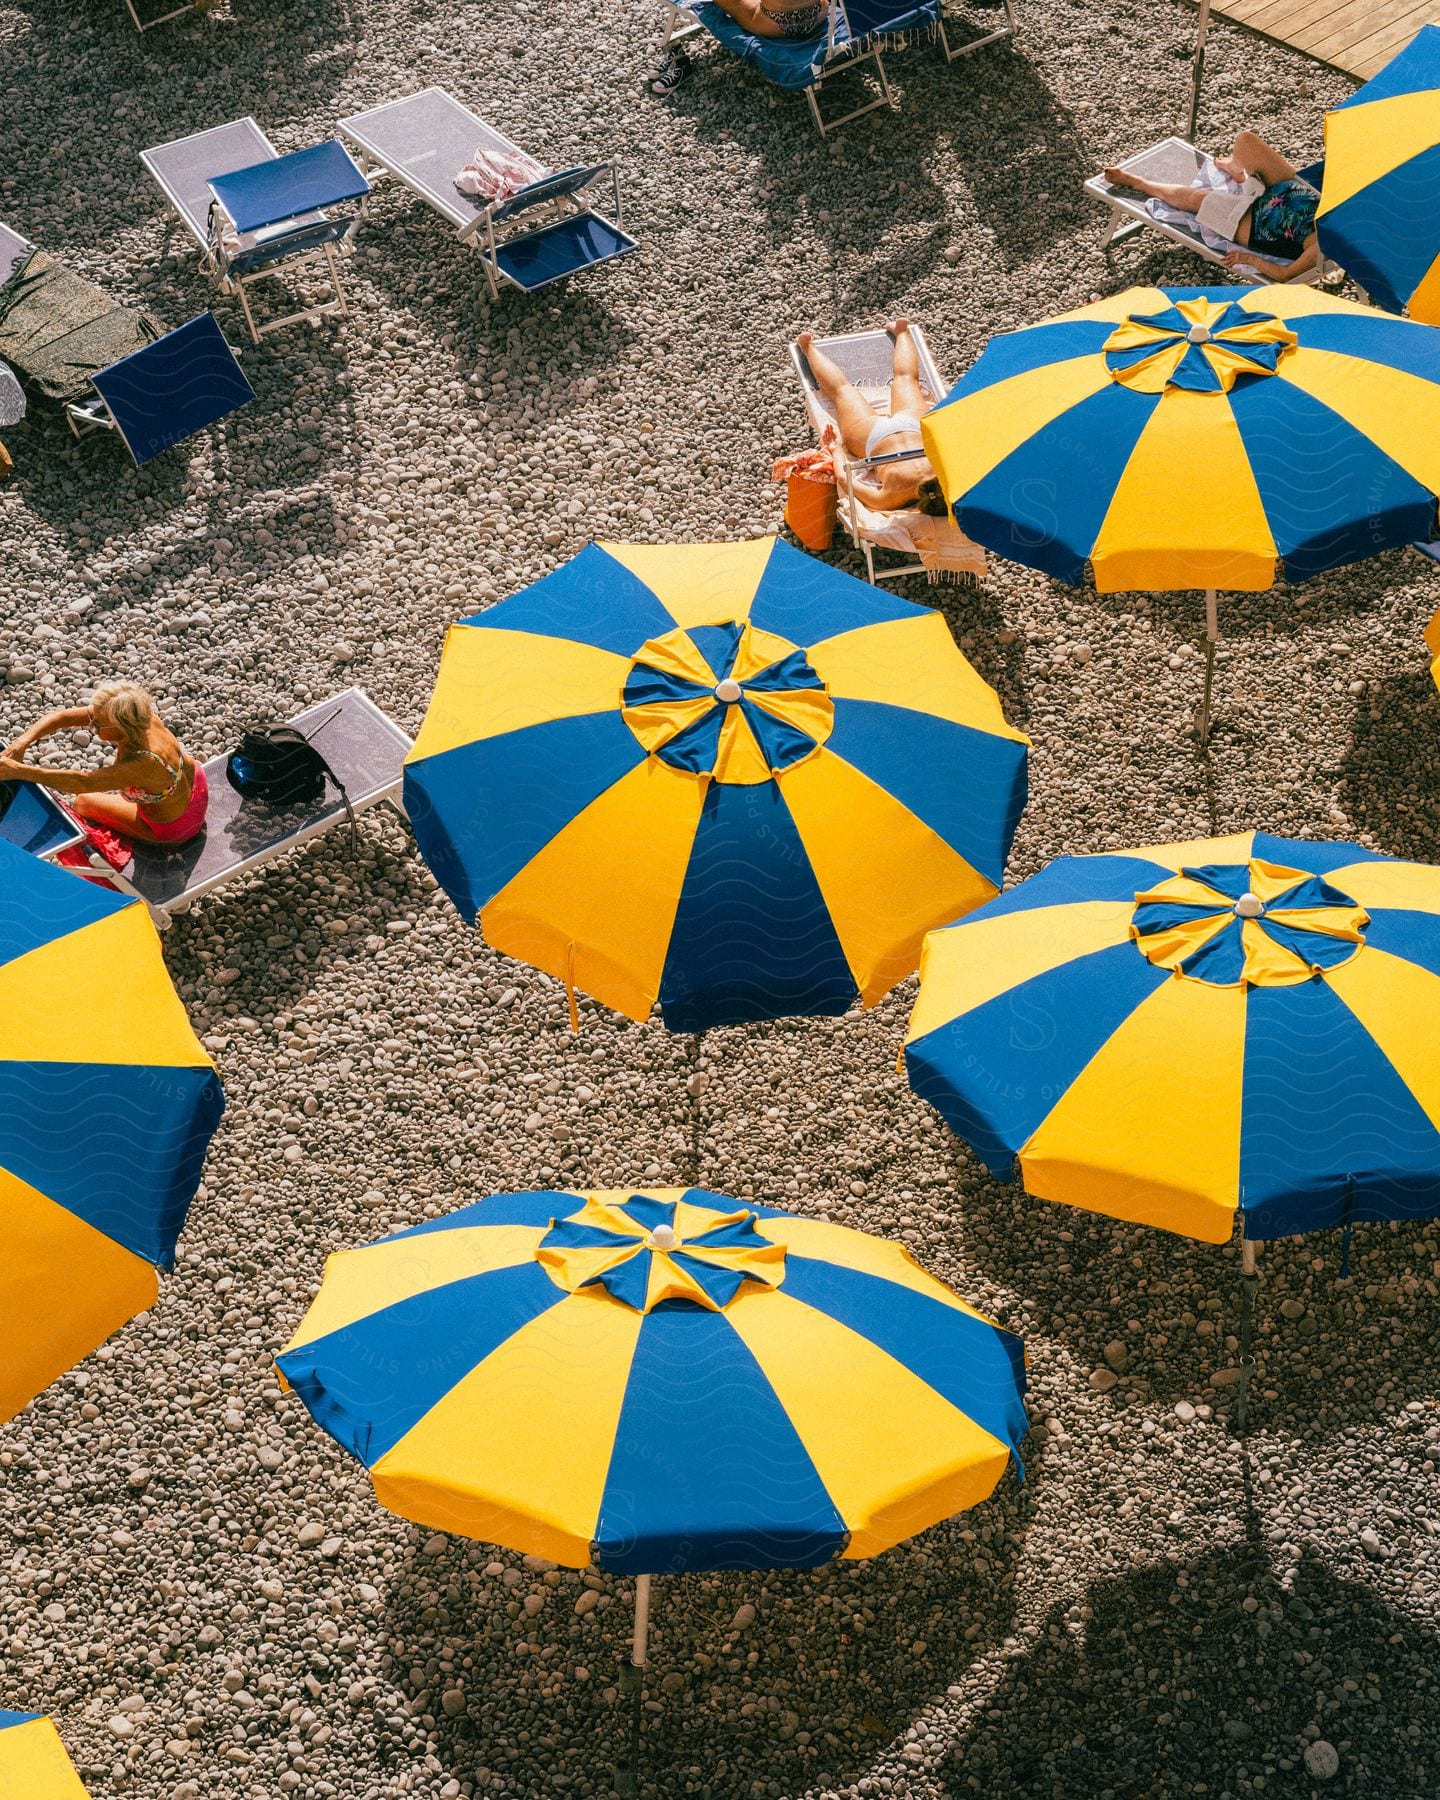 Blue and yellow beach umbrella with chairs on the sand and people enjoying the sun.